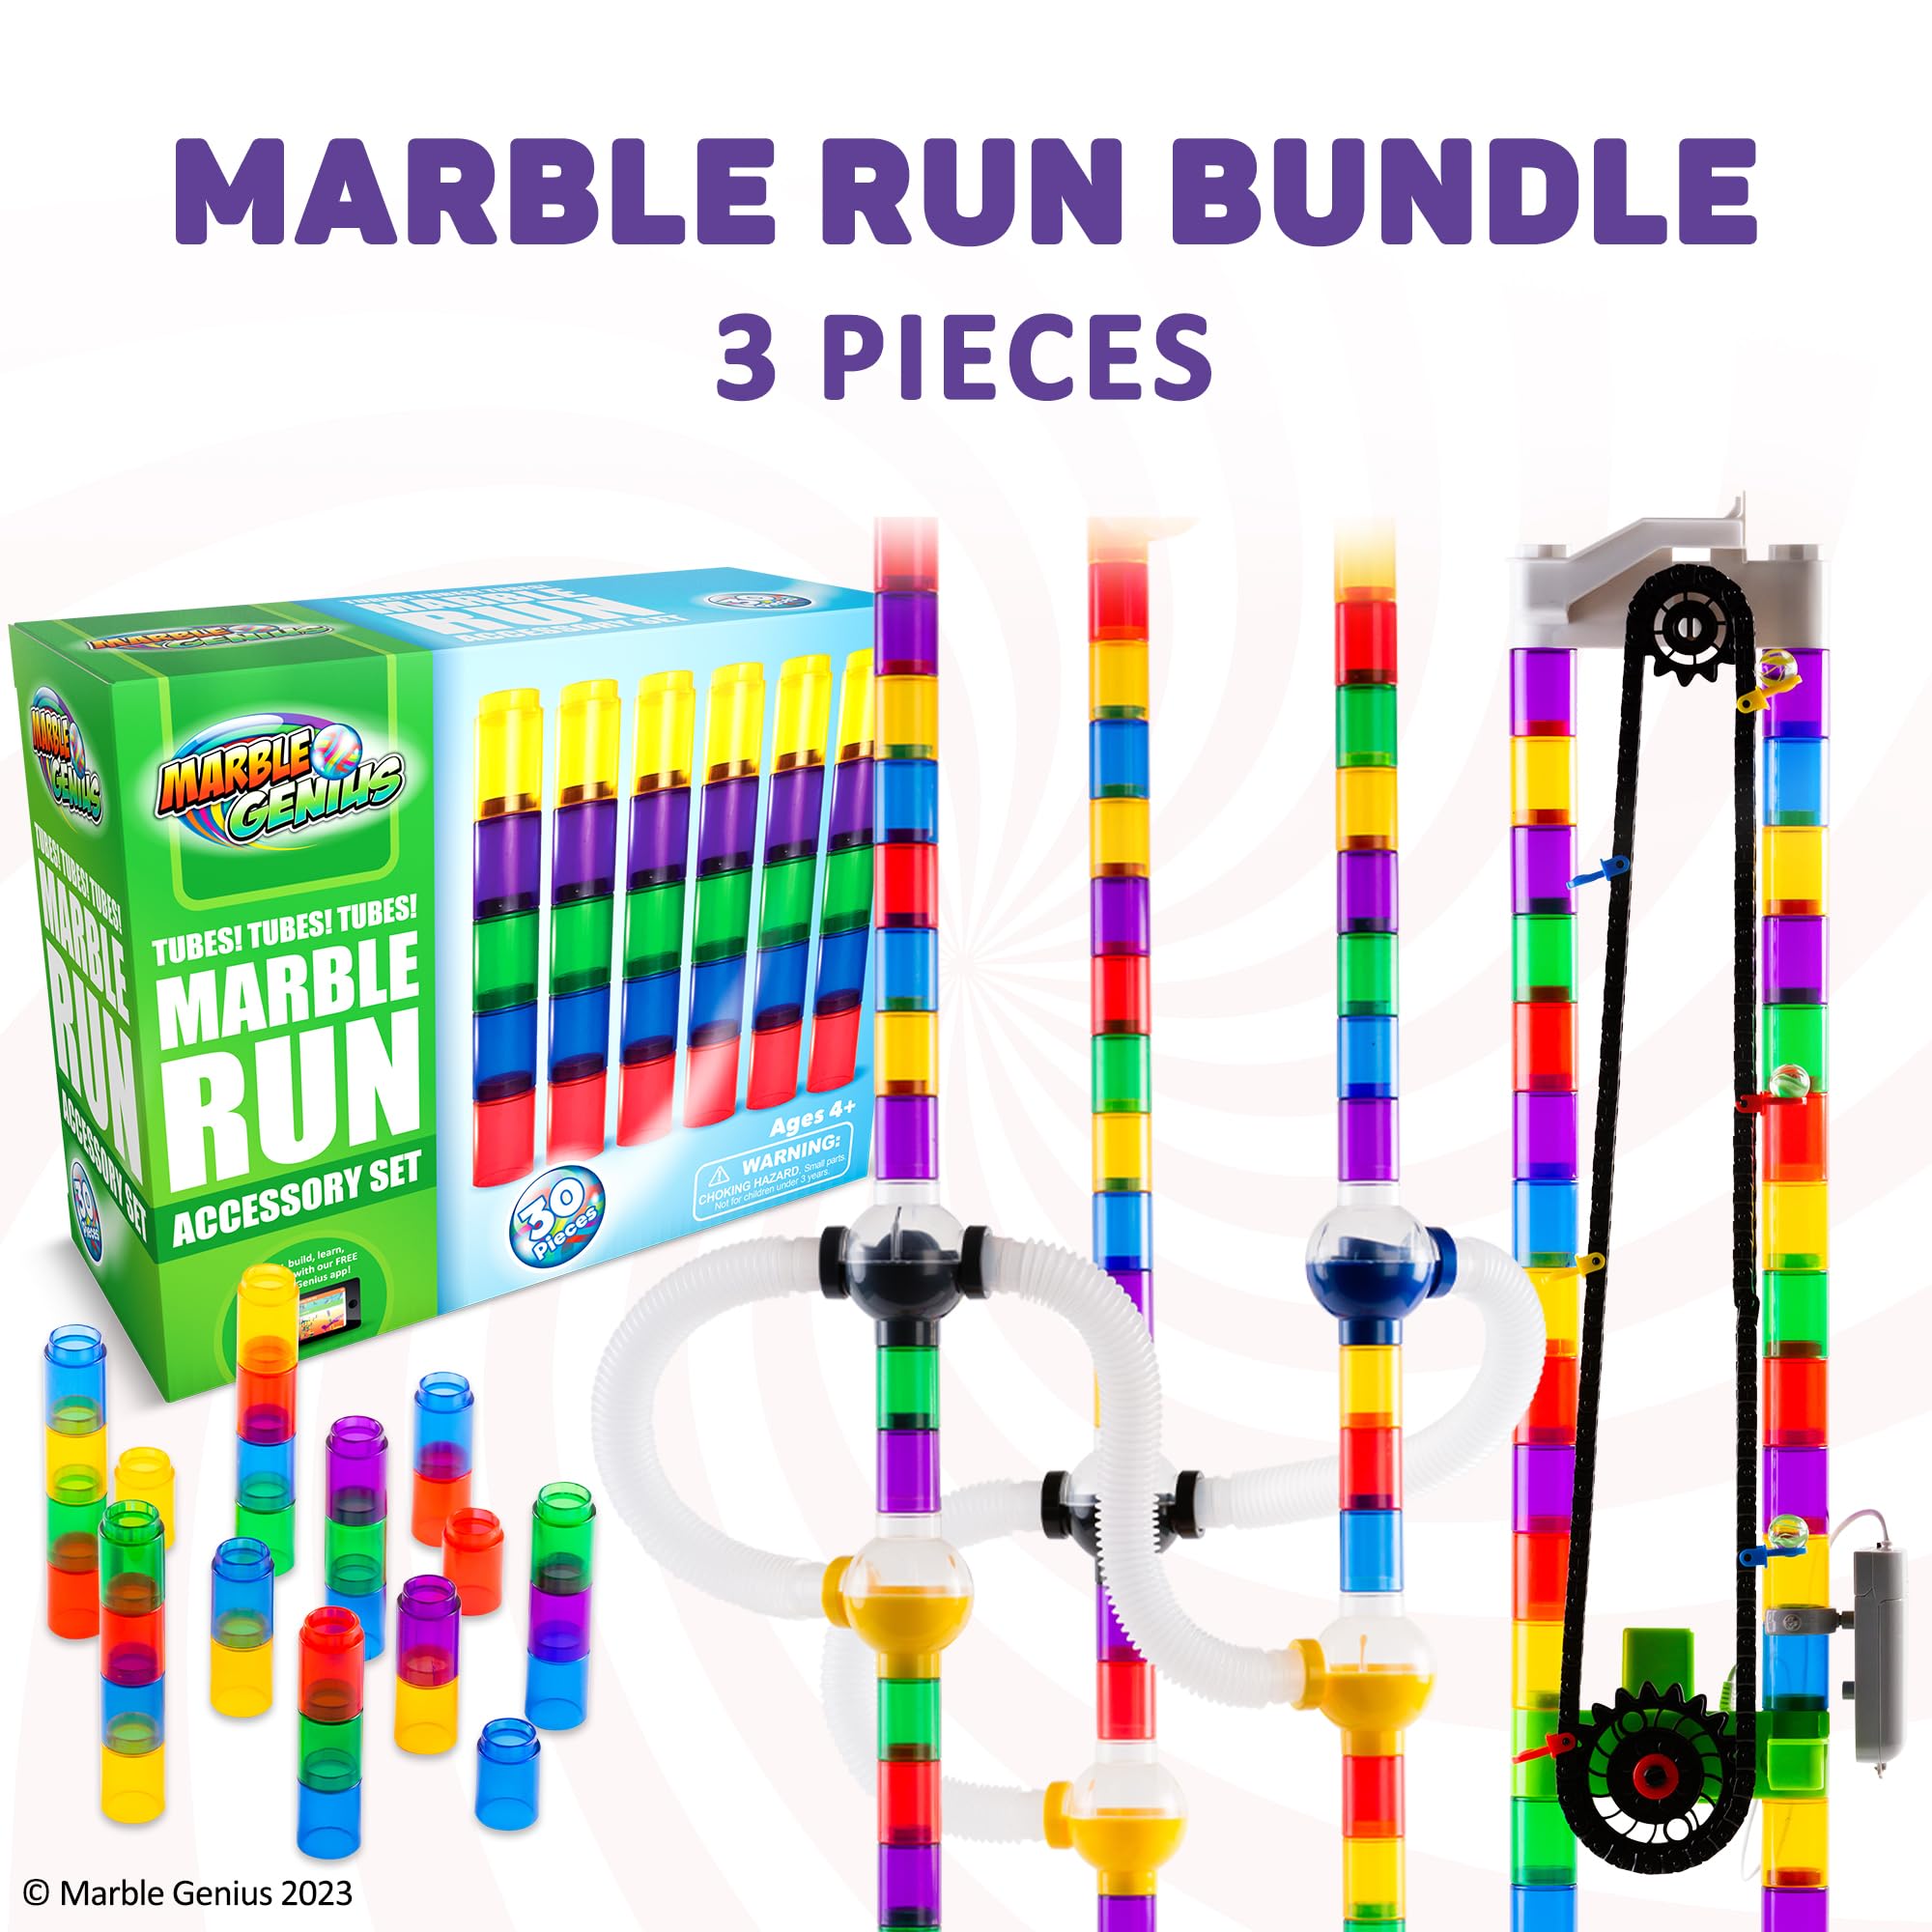 Marble Genius Bundle: Automatic Chain Lift, Pipes, Spheres, and, Tubes, The Perfect Marble Run Accessory Add-On Sets for Creating Exciting Mazes, Tracks, and Races